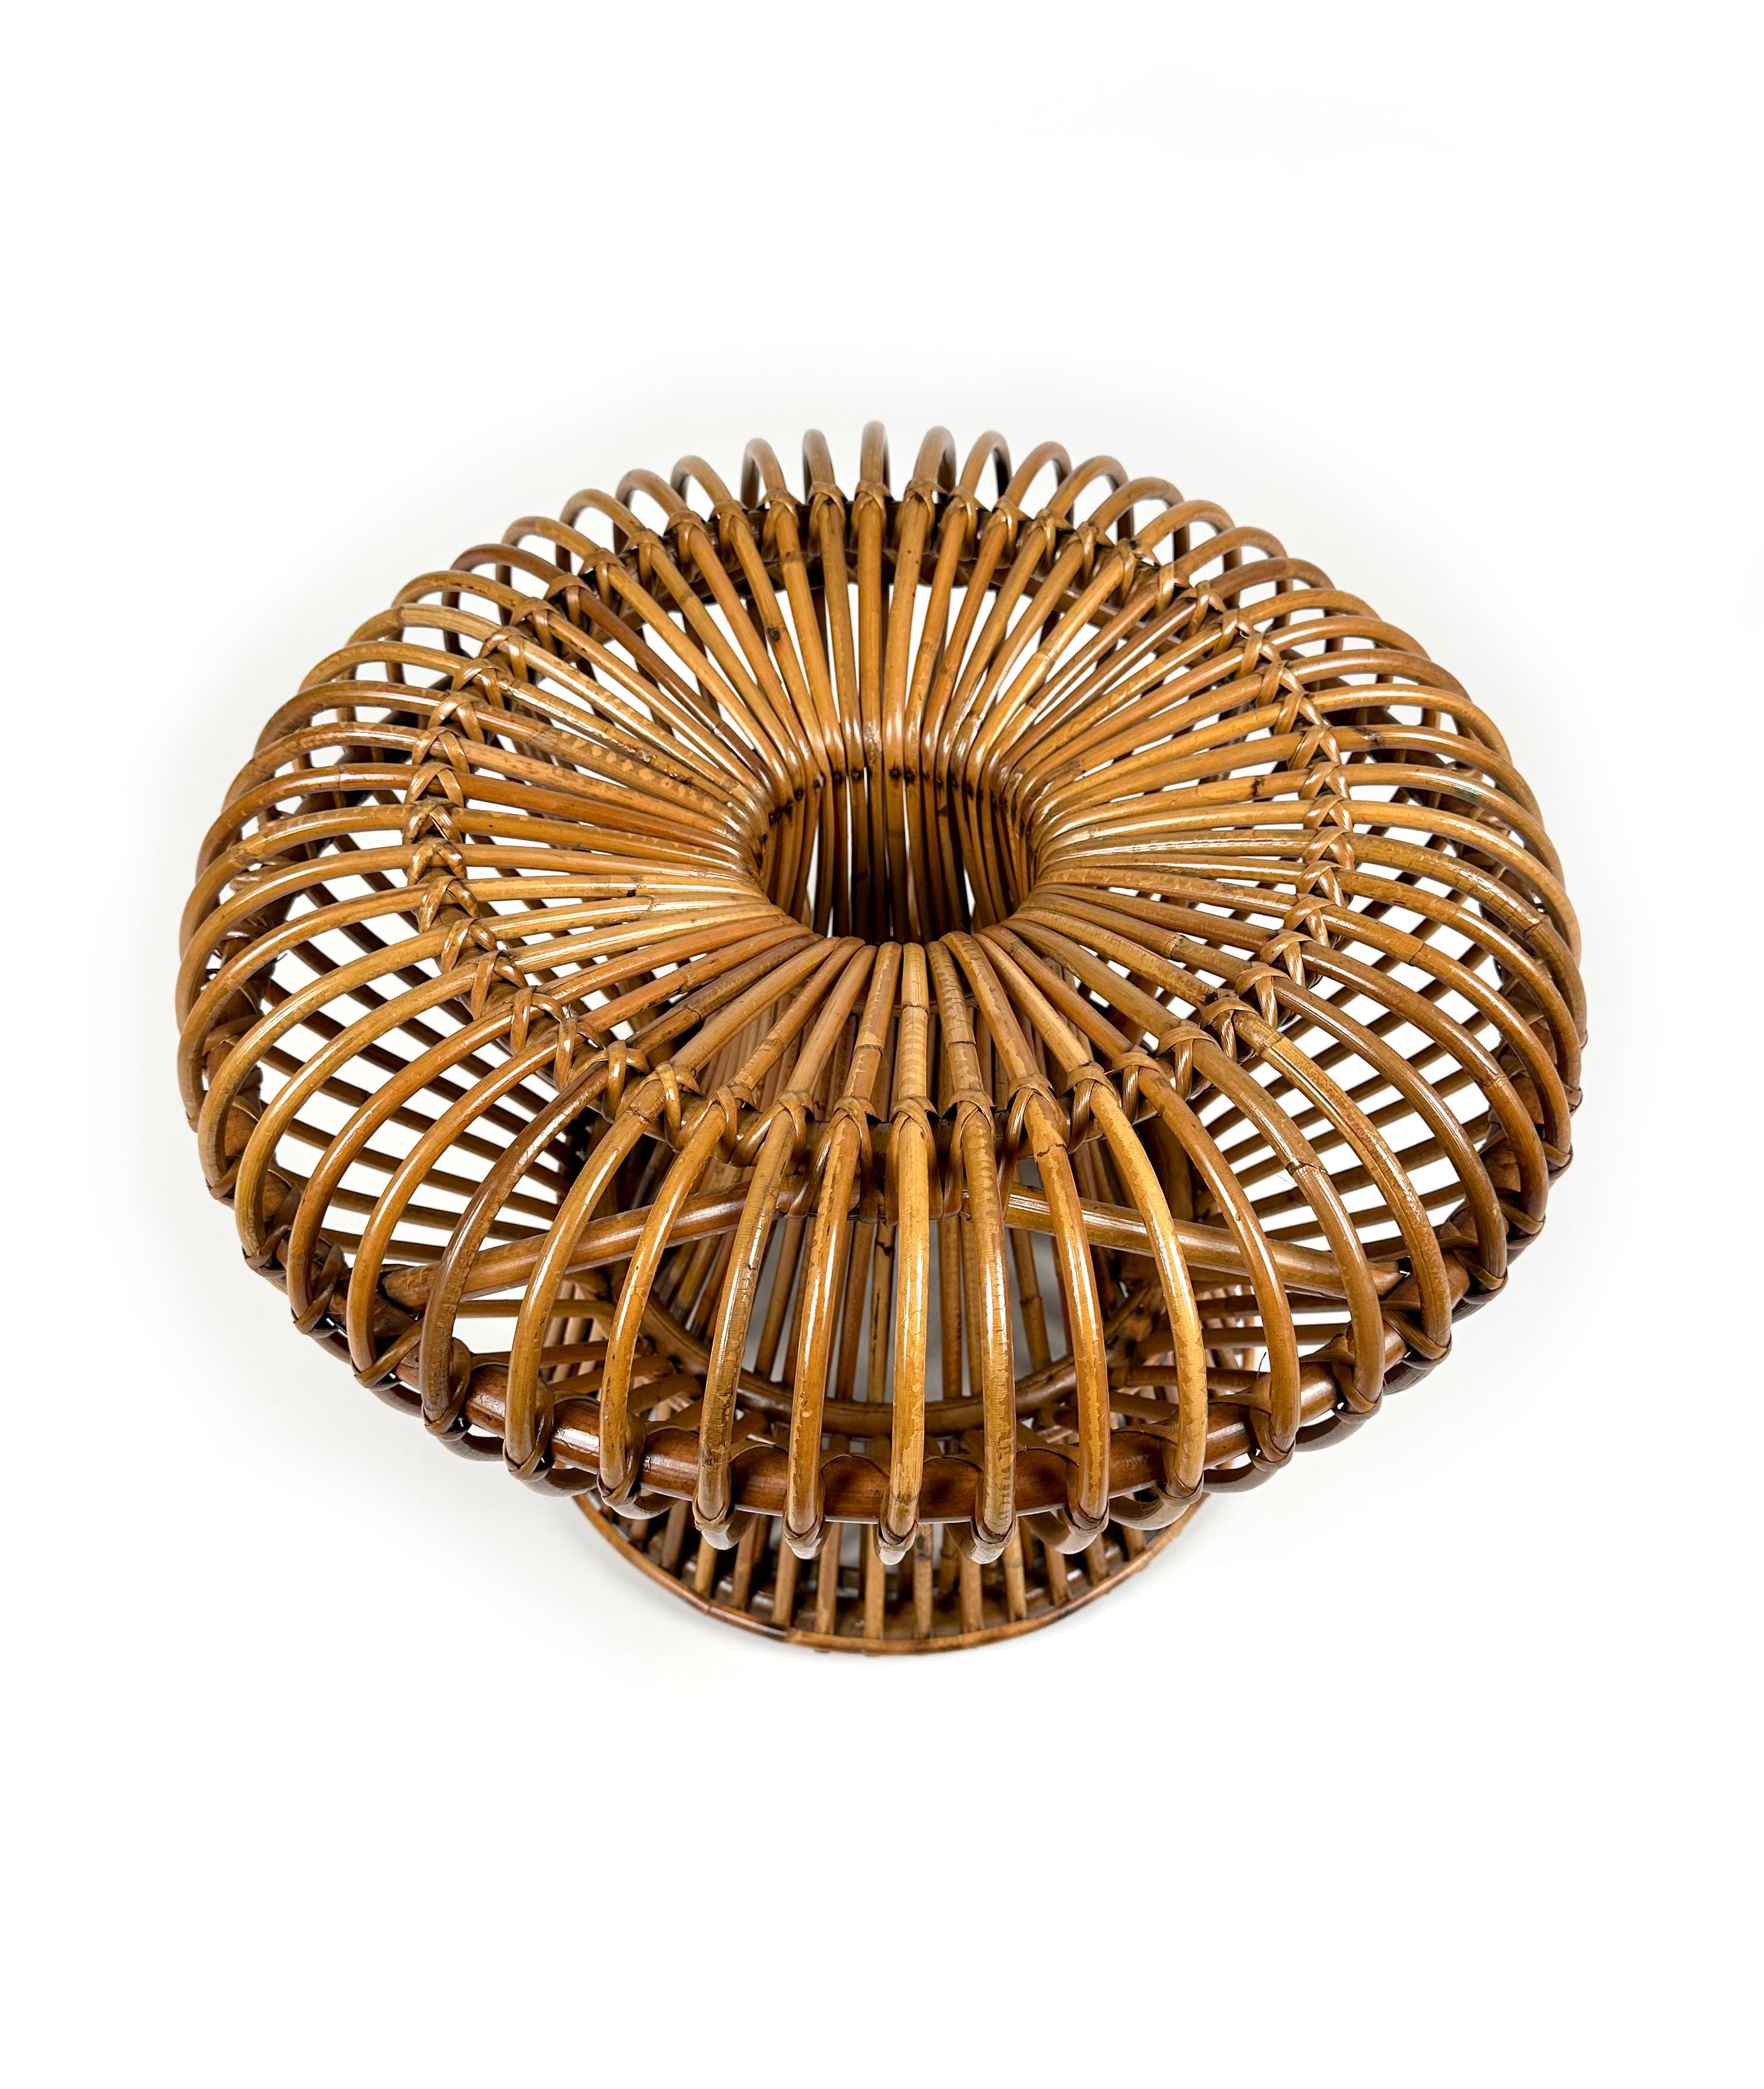 Midcentury Ottoman Stool in Bamboo and Rattan Franco Albini Style, Italy, 1960s For Sale 3